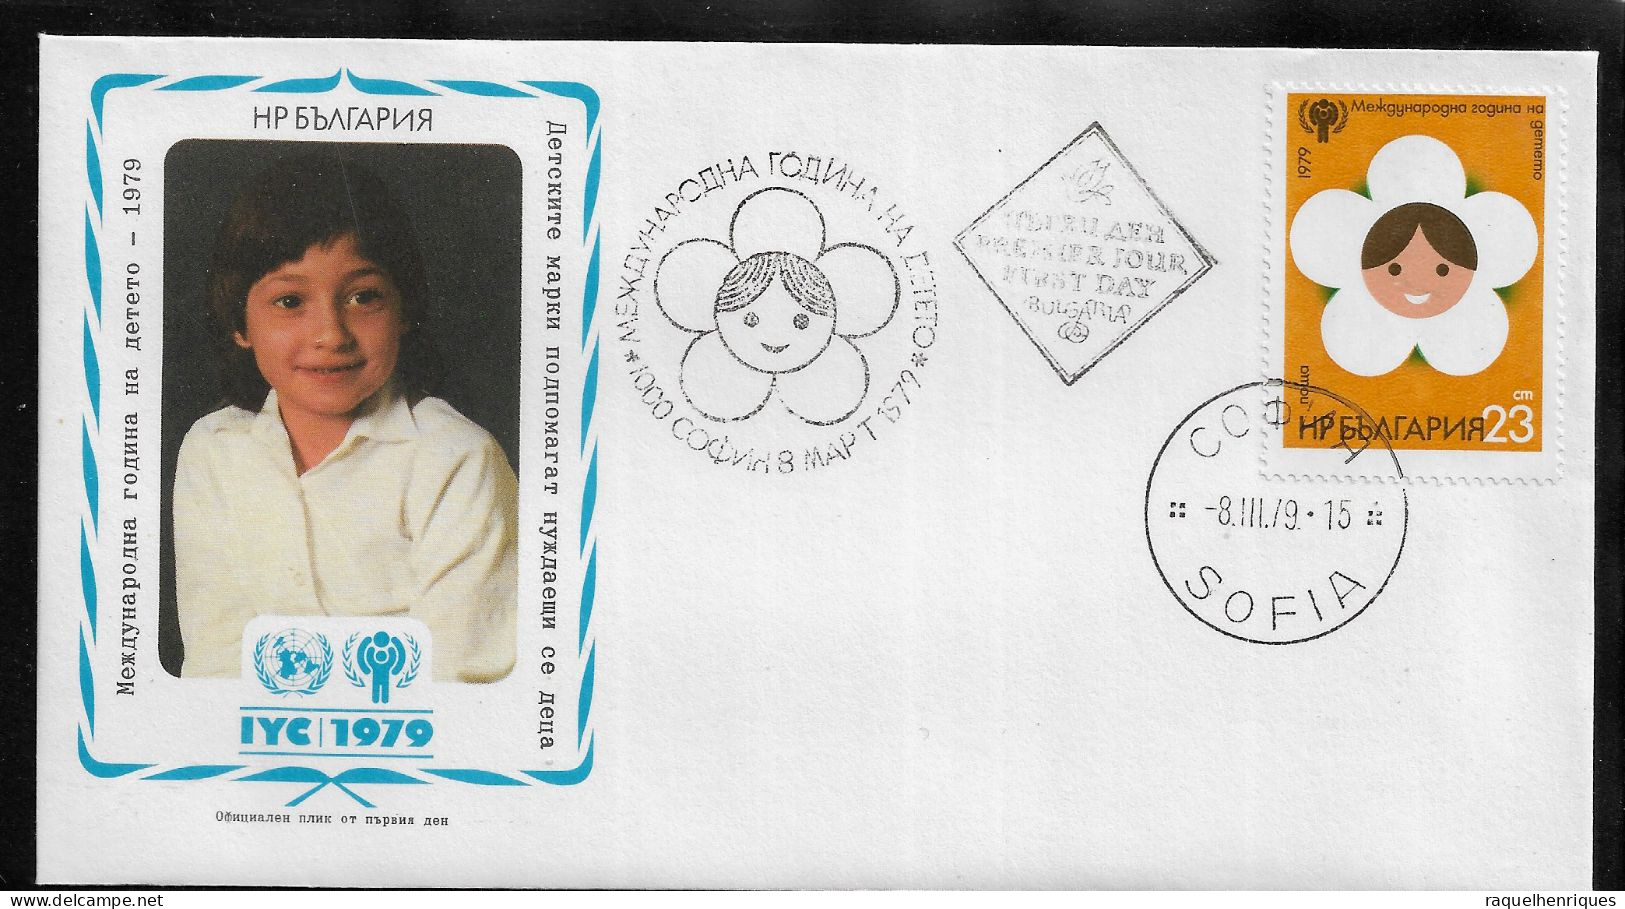 BULGARIA FDC COVER - 1979 International Year Of The Child SET FDC (FDC79#08) - Covers & Documents